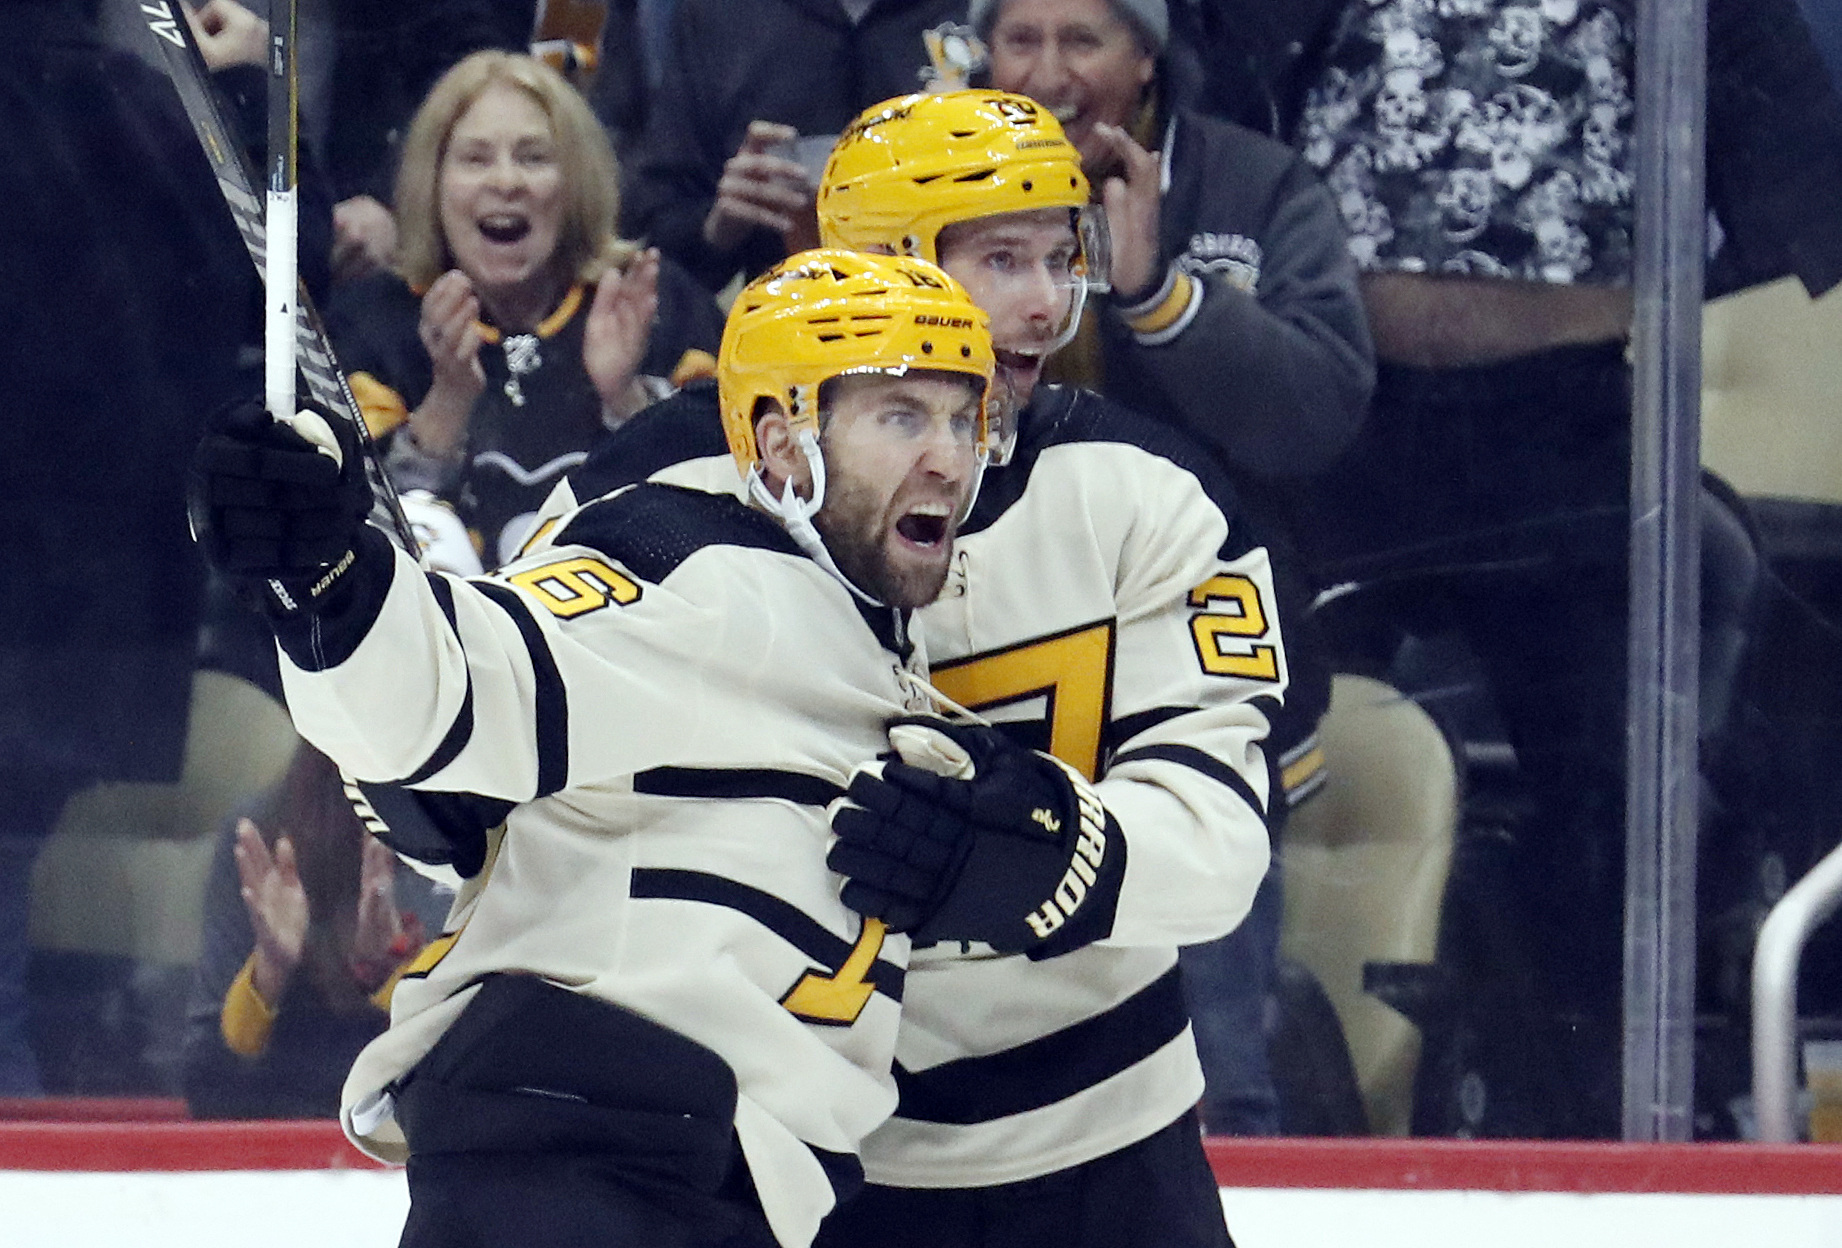 Devils nearly pull off insane comeback in loss to Penguins